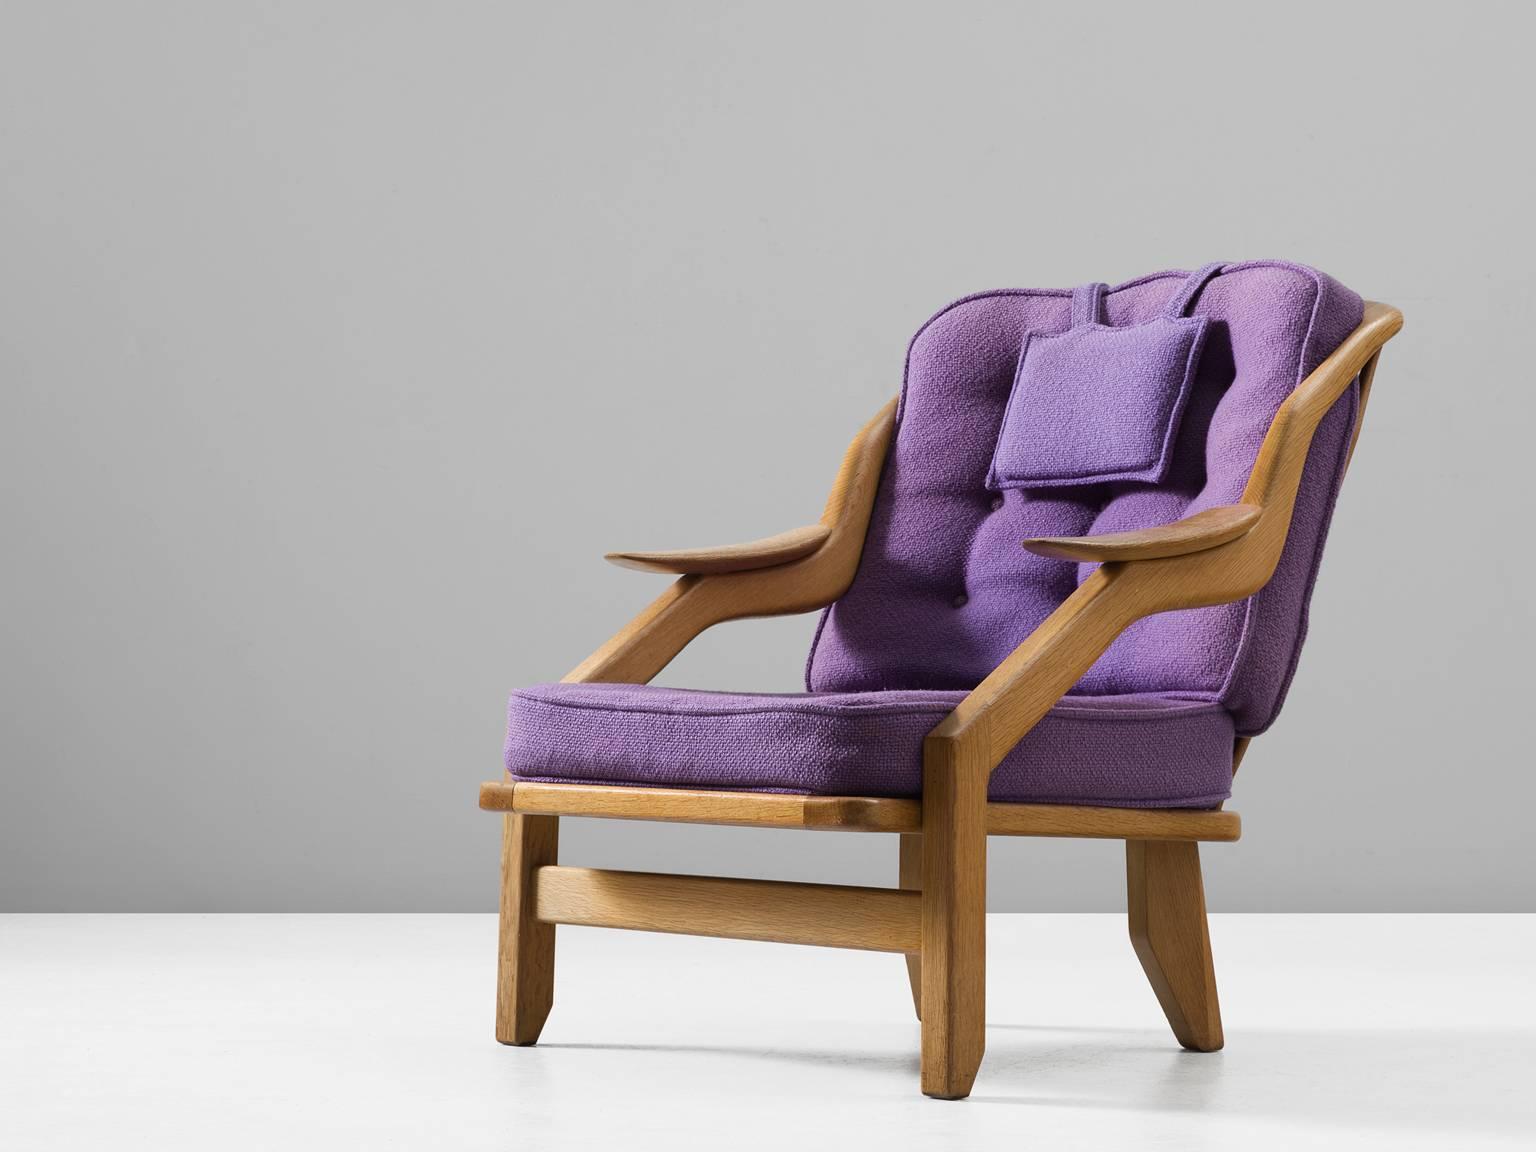 Lounge chair, in oak and fabric, by Guillerme et Chambron, France 1960s. 

Guillerme and Chambron is known for their extreme high quality solid oak furniture, from which this is another great example. This chair has a very interesting shape